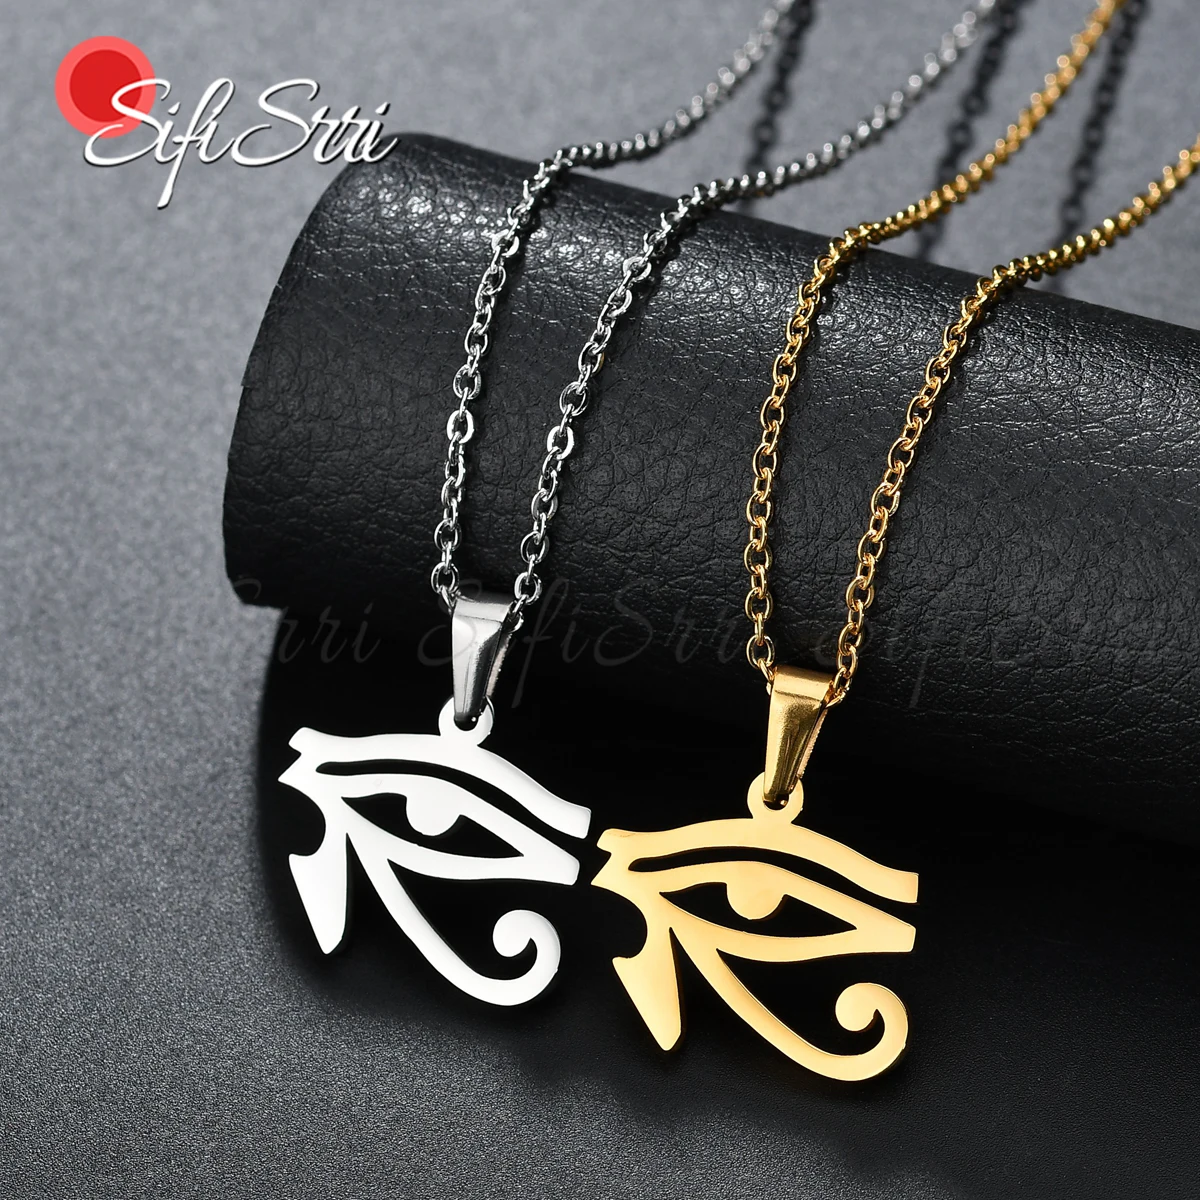 Sifisrri New Minimalistic Ancient Evil Eyes Of Horus Necklaces For Women Men Stainless Steel Pendant Greek Letter Jewelry Gift